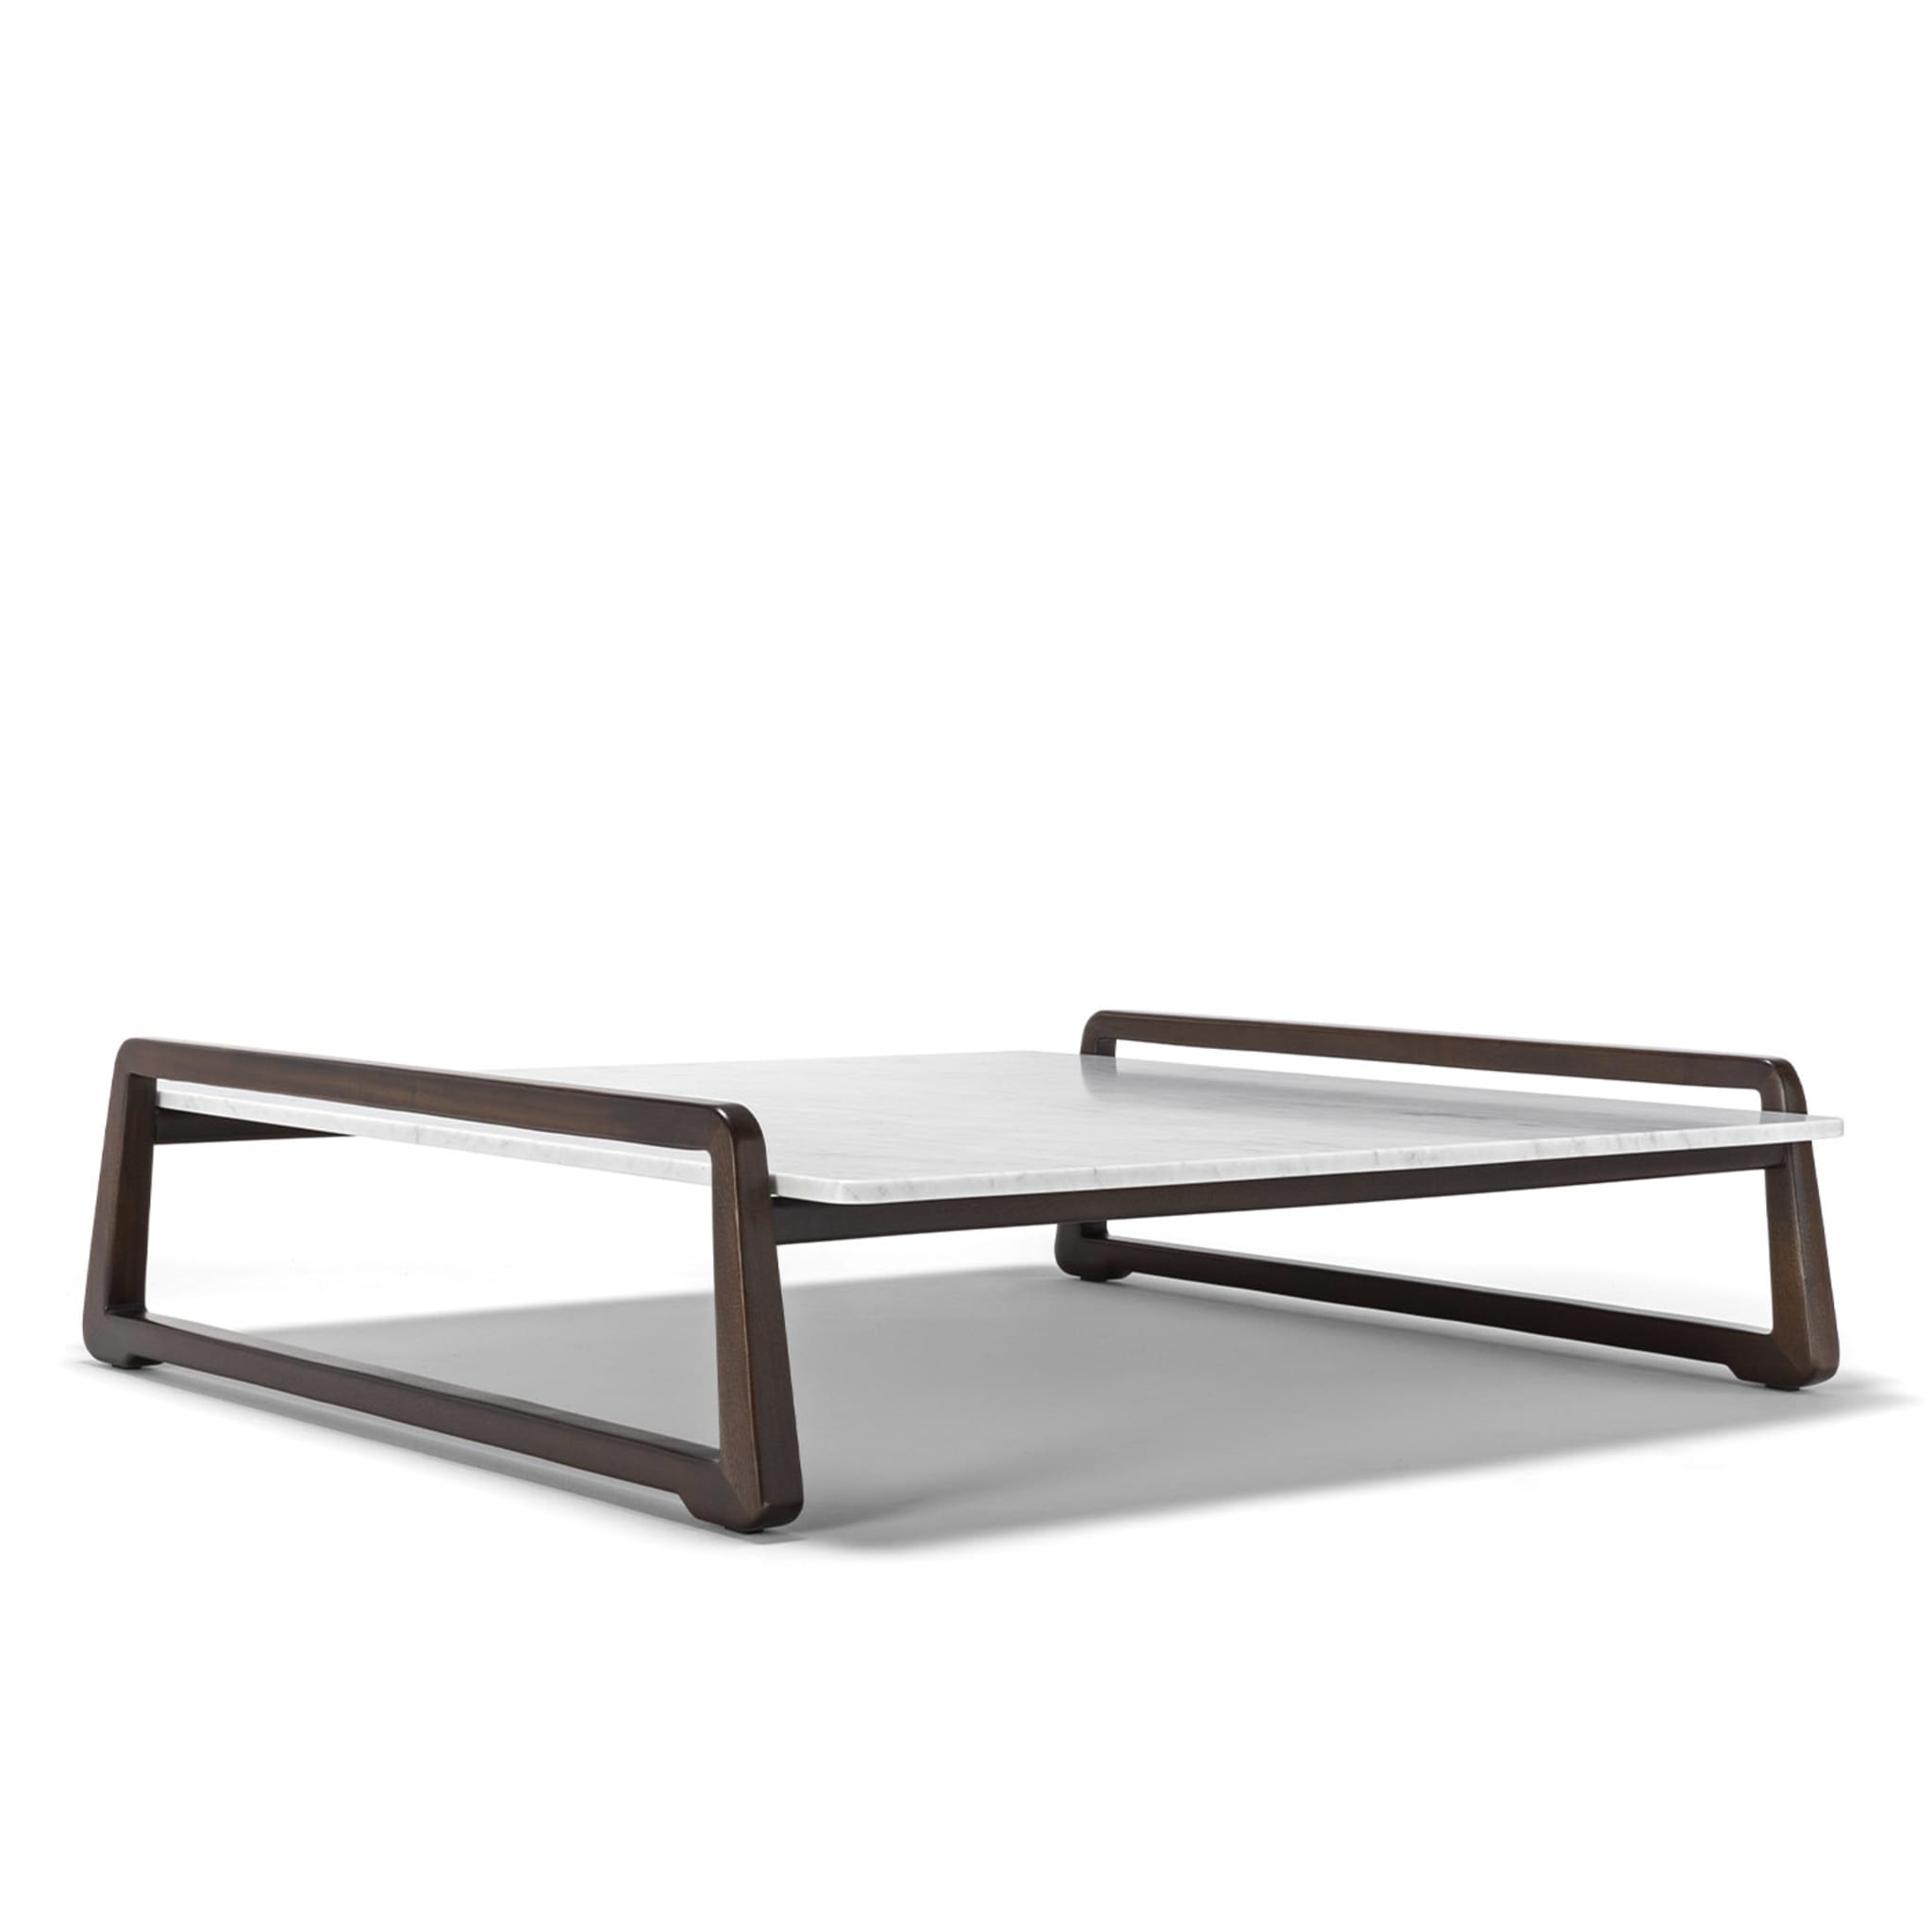 Sunset Barrique + Carrara Coffee Table by Paola Navone - Alternative view 4